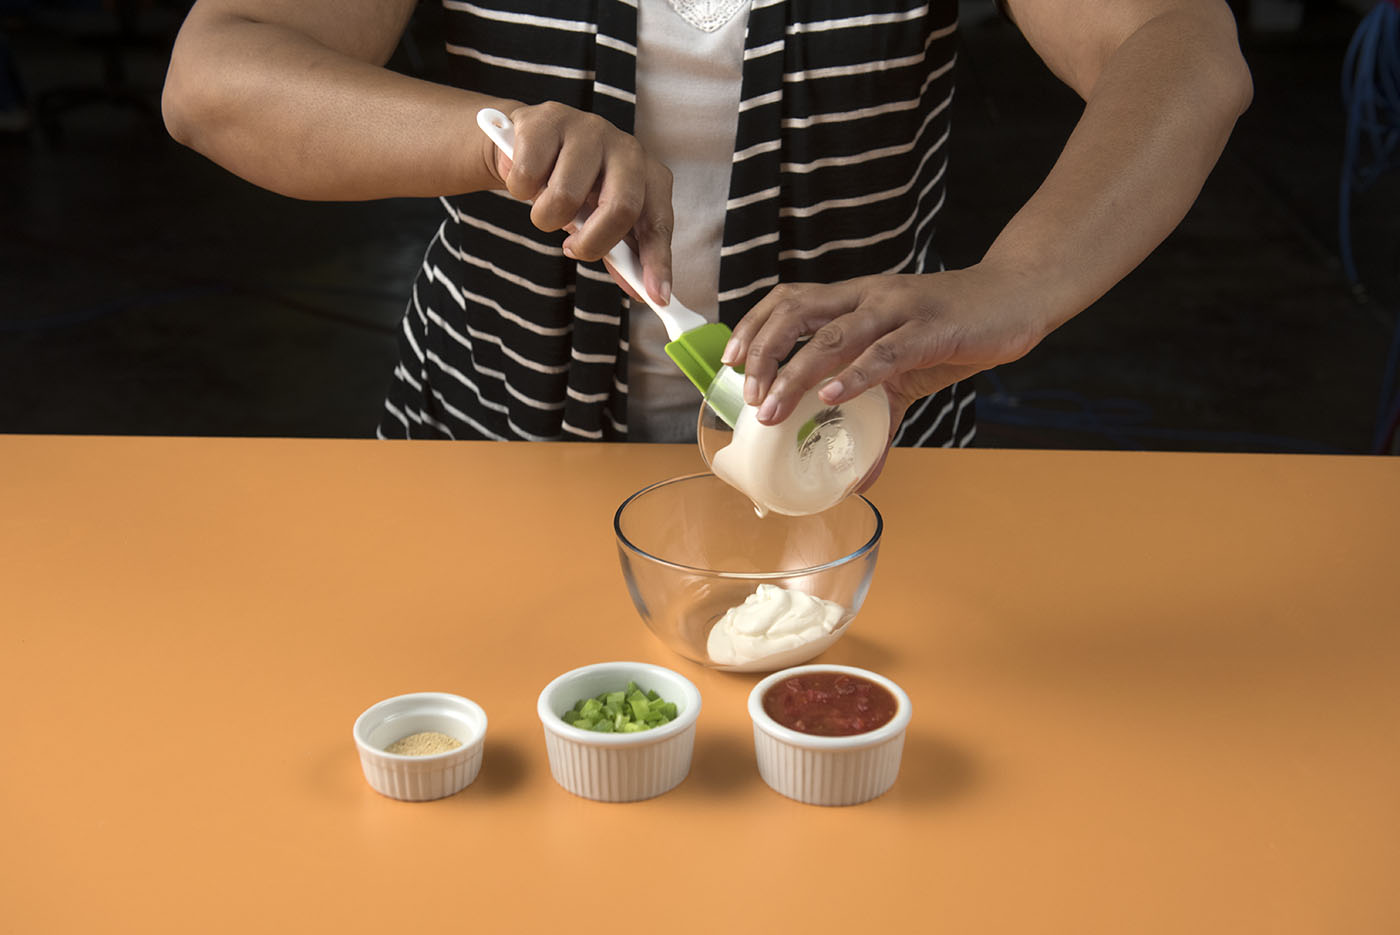 A Woman prepares to mix mayonaise, salsa, green onions, and spices together in a glass bow.